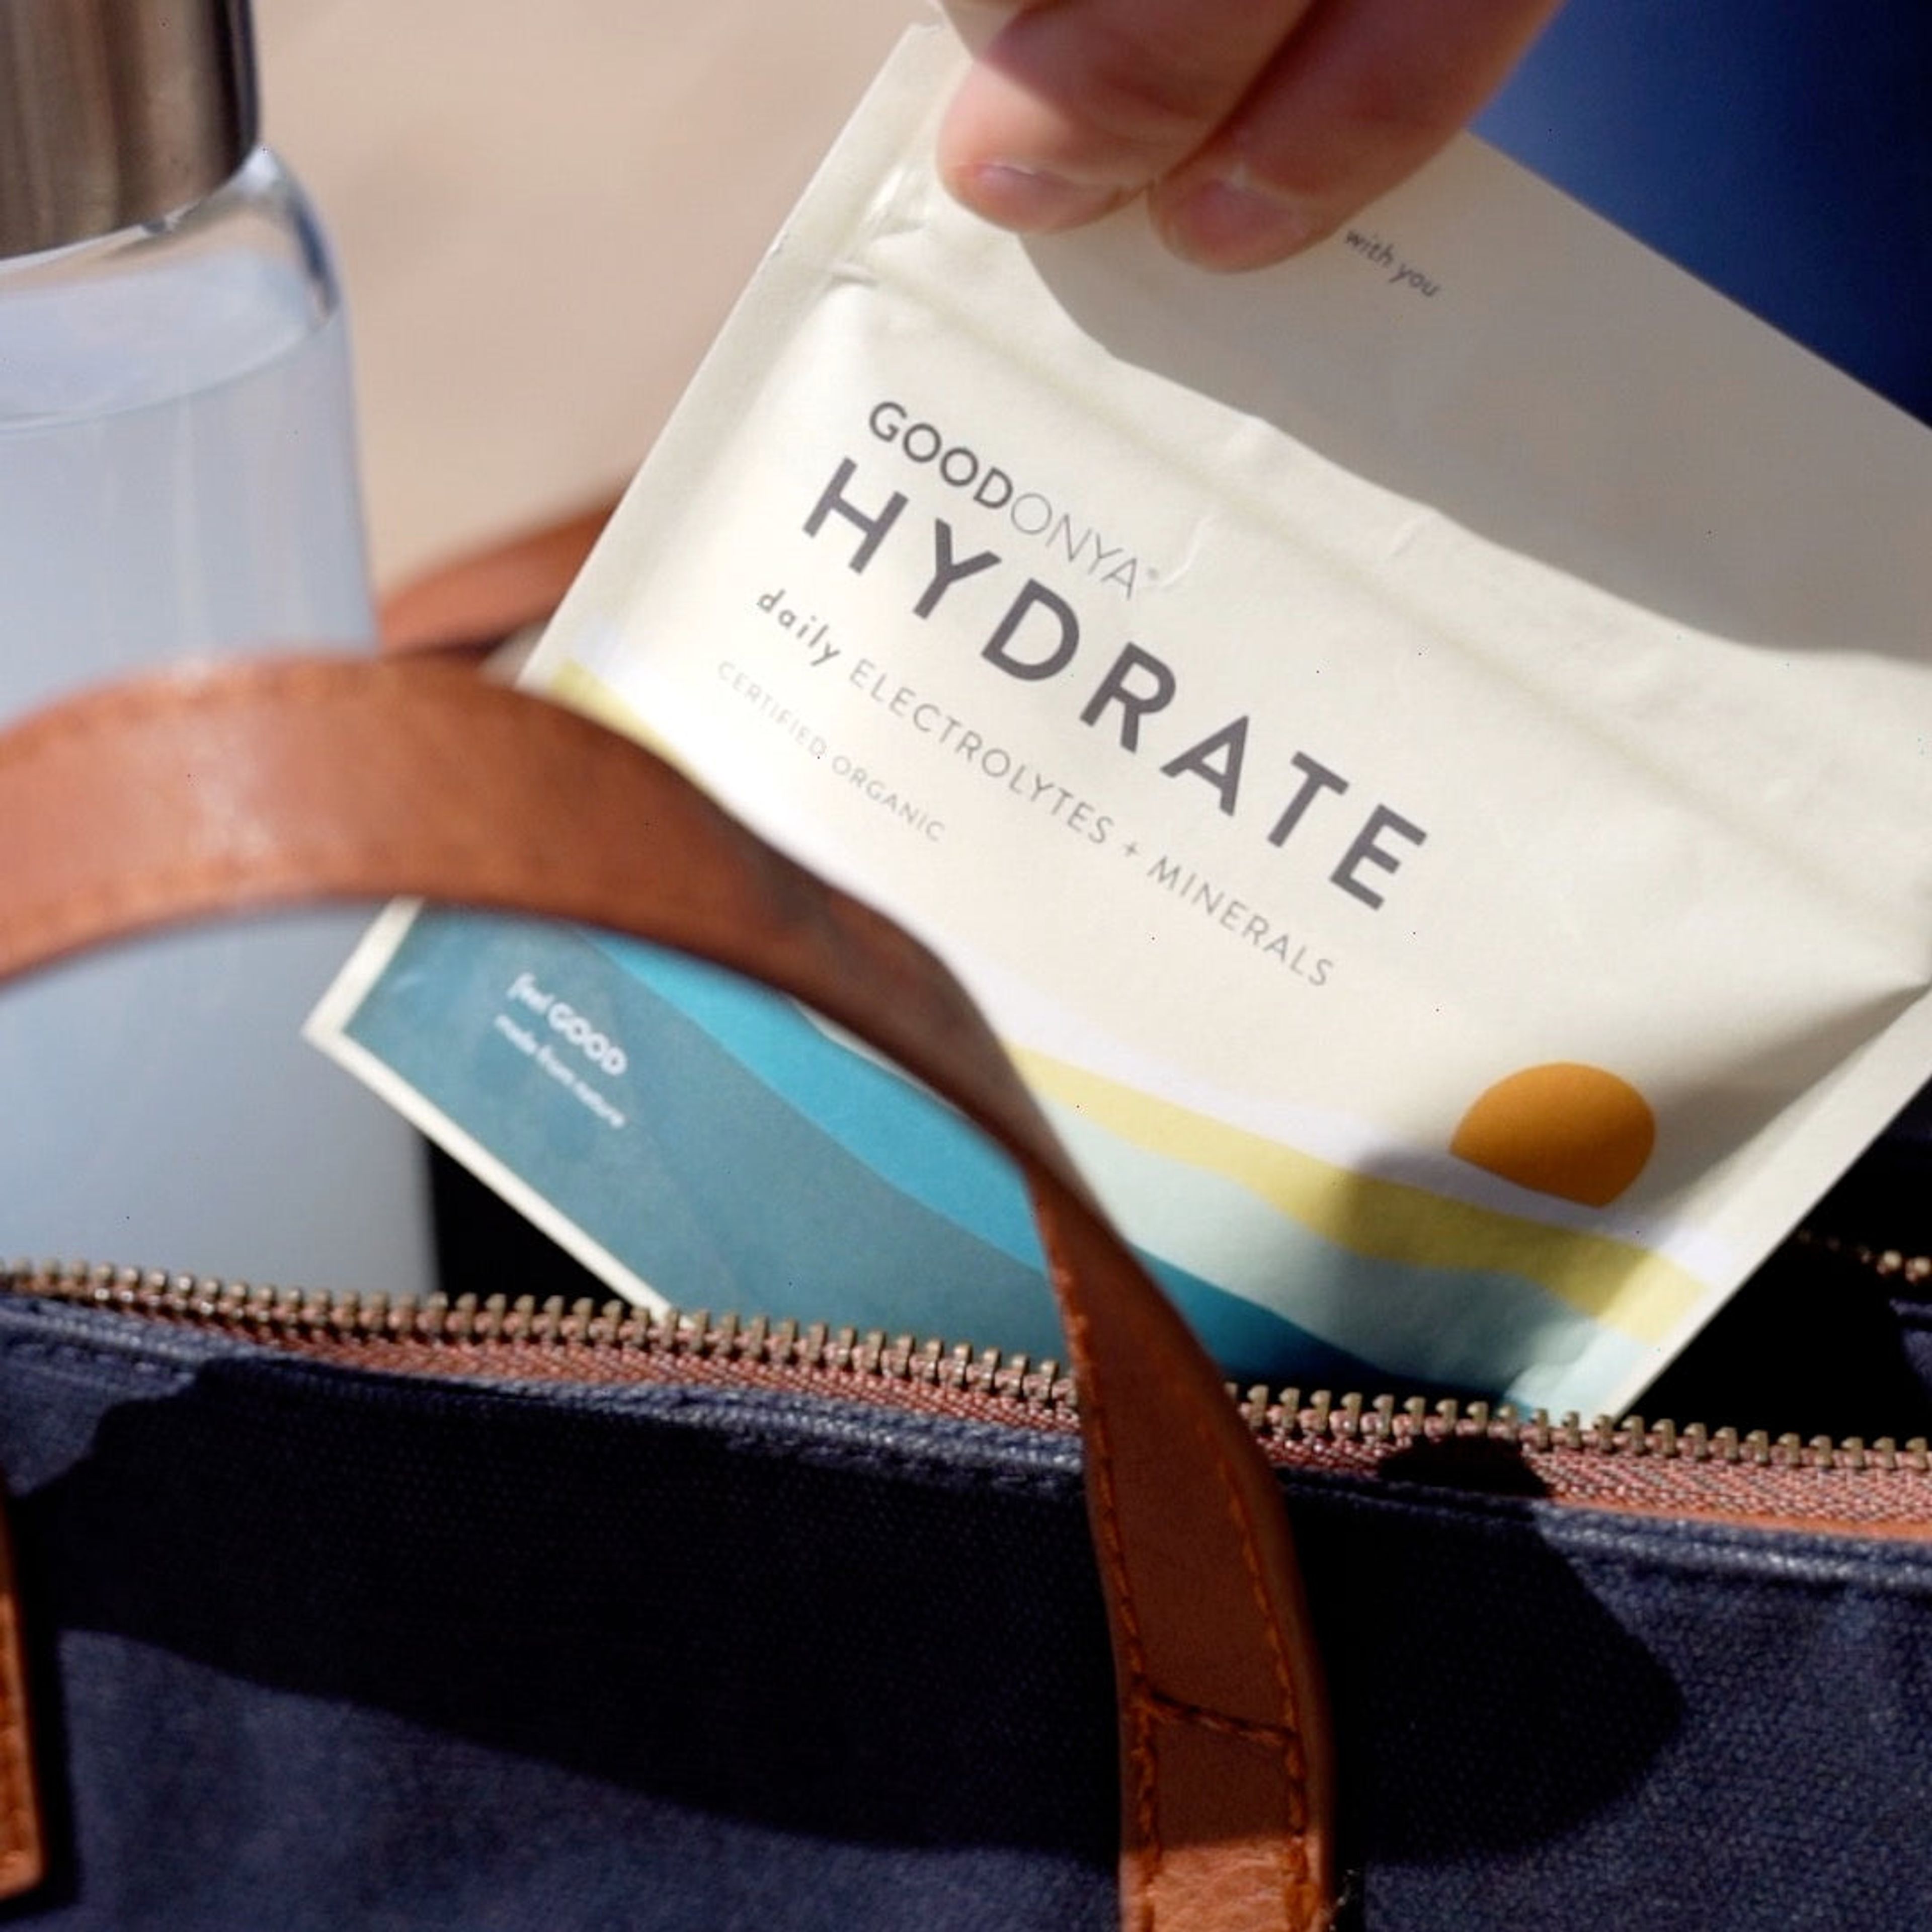 GOODONYA HYDRATE • ELECTROLYTE + MINERAL Powder Day Pack